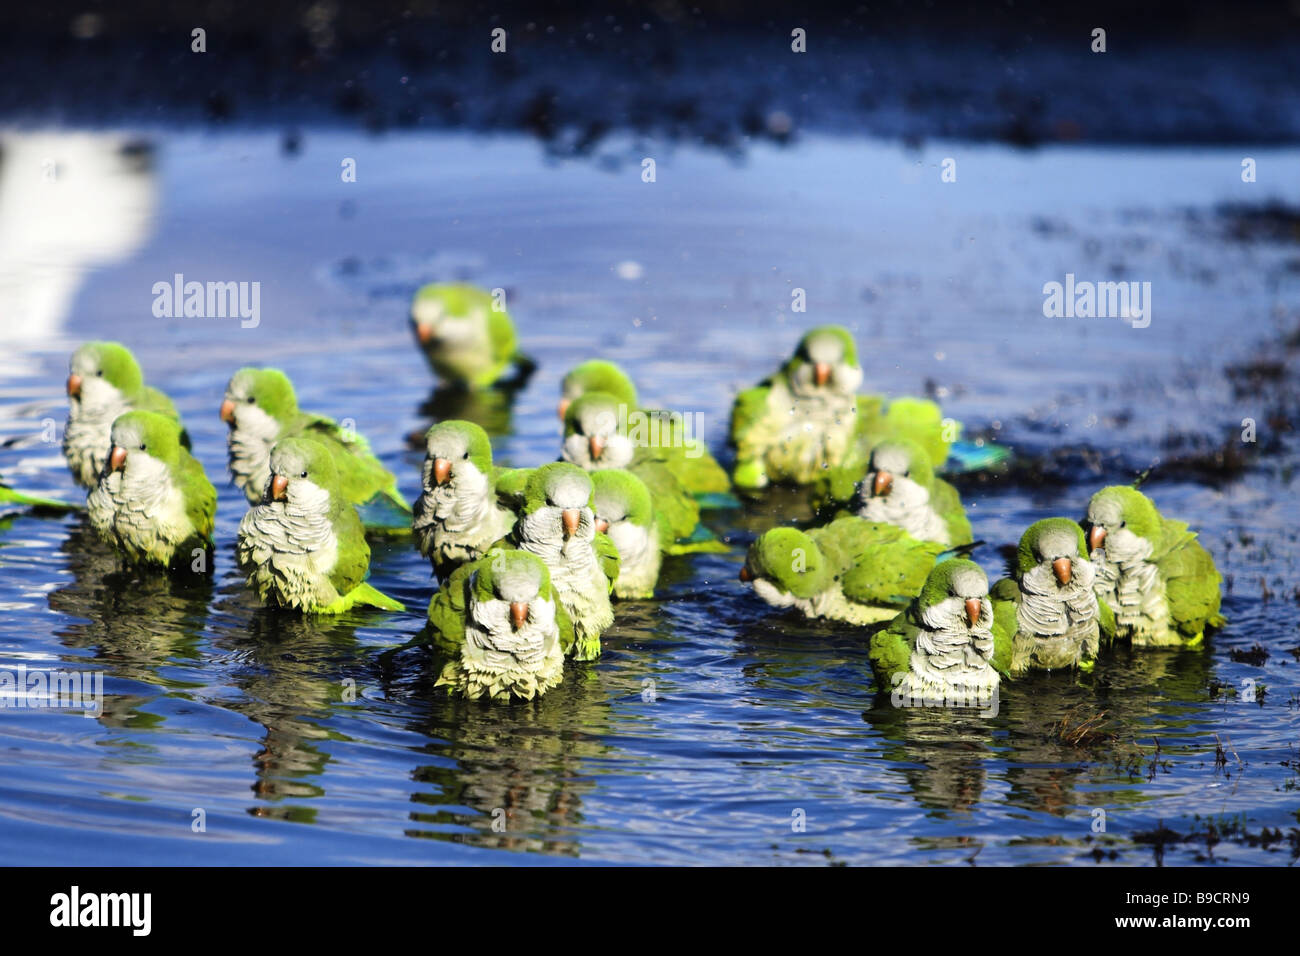 Parrots in puddle Stock Photo